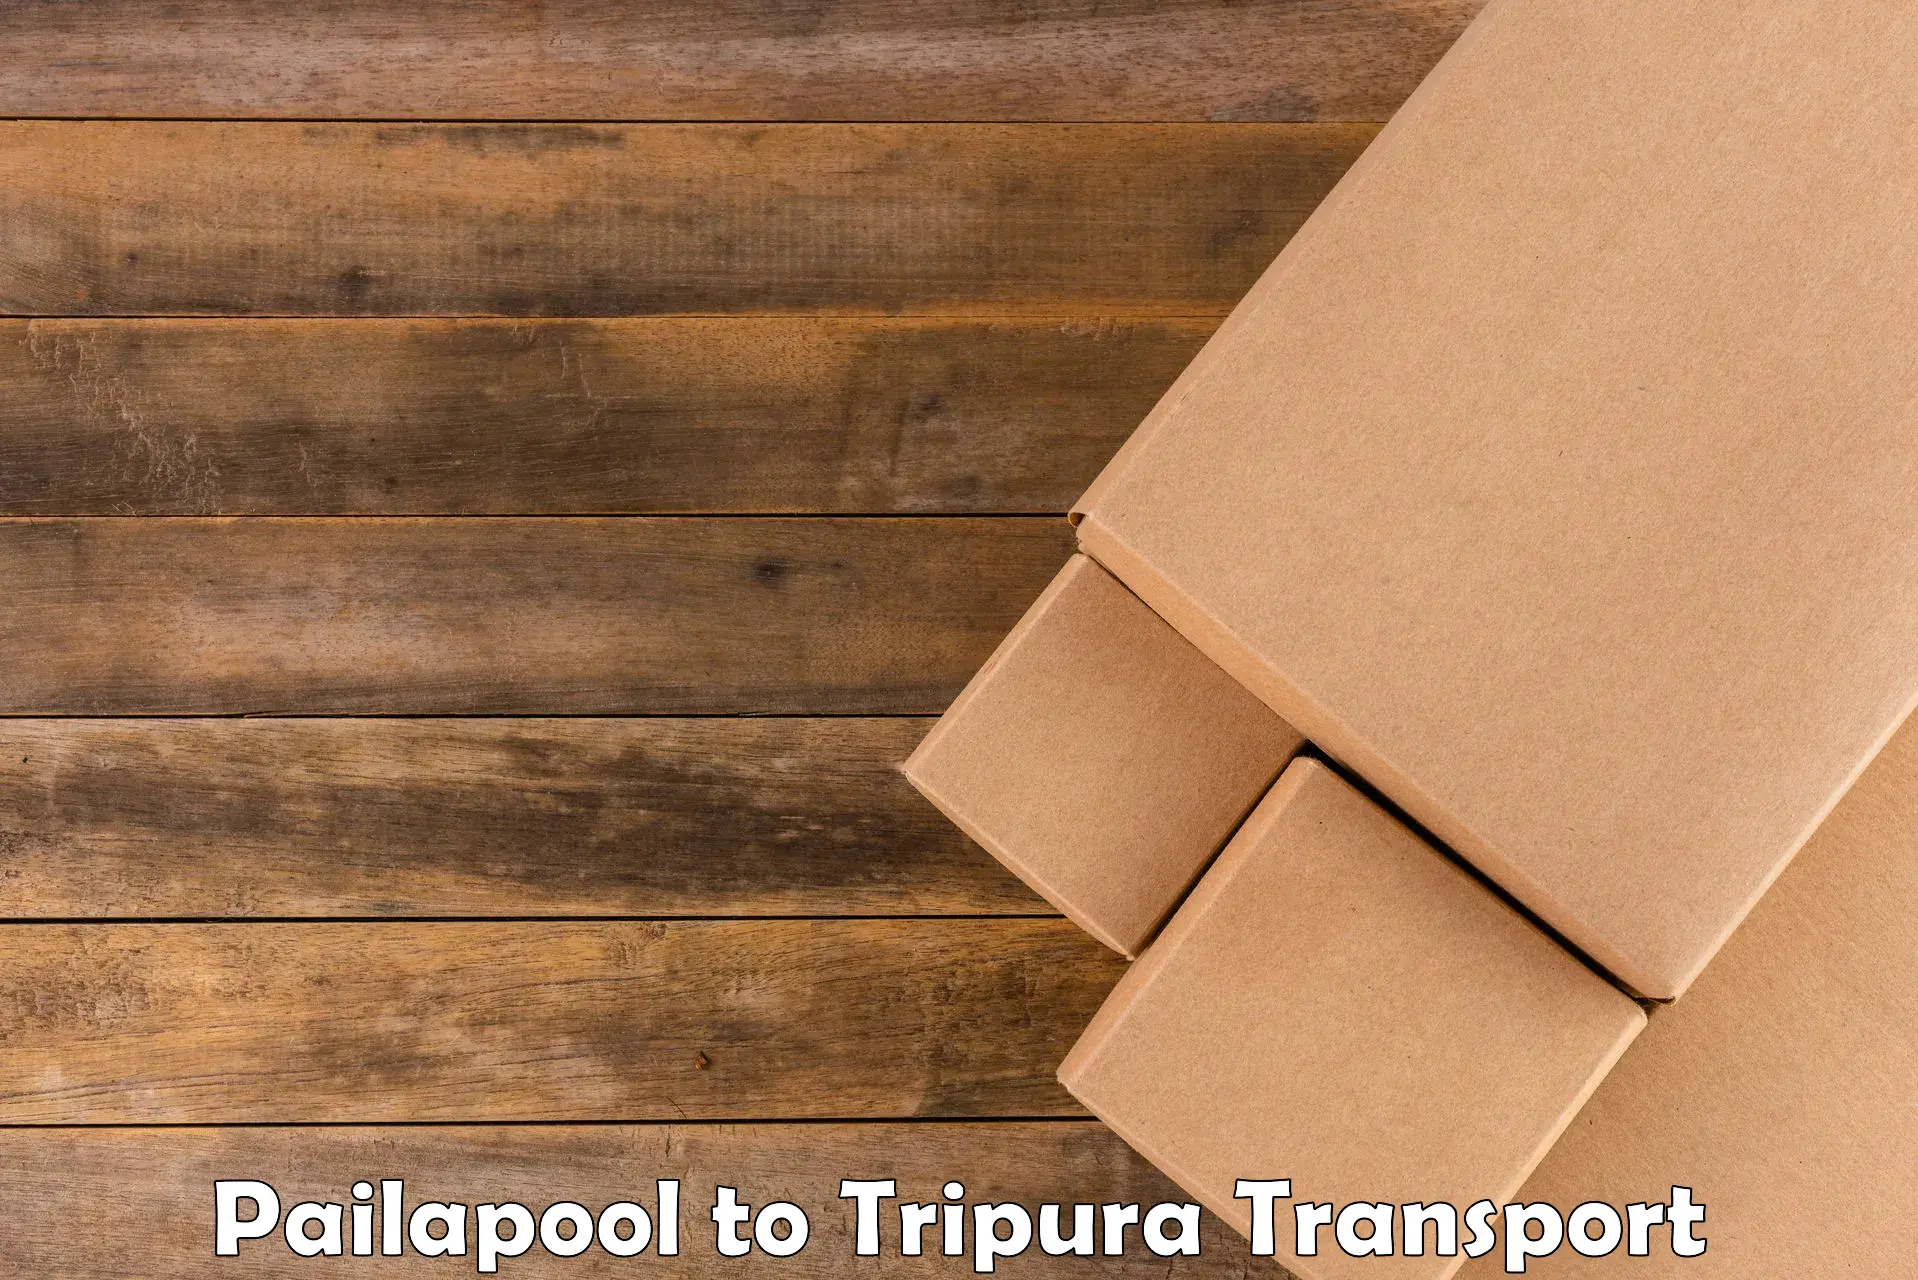 Air freight transport services Pailapool to Tripura